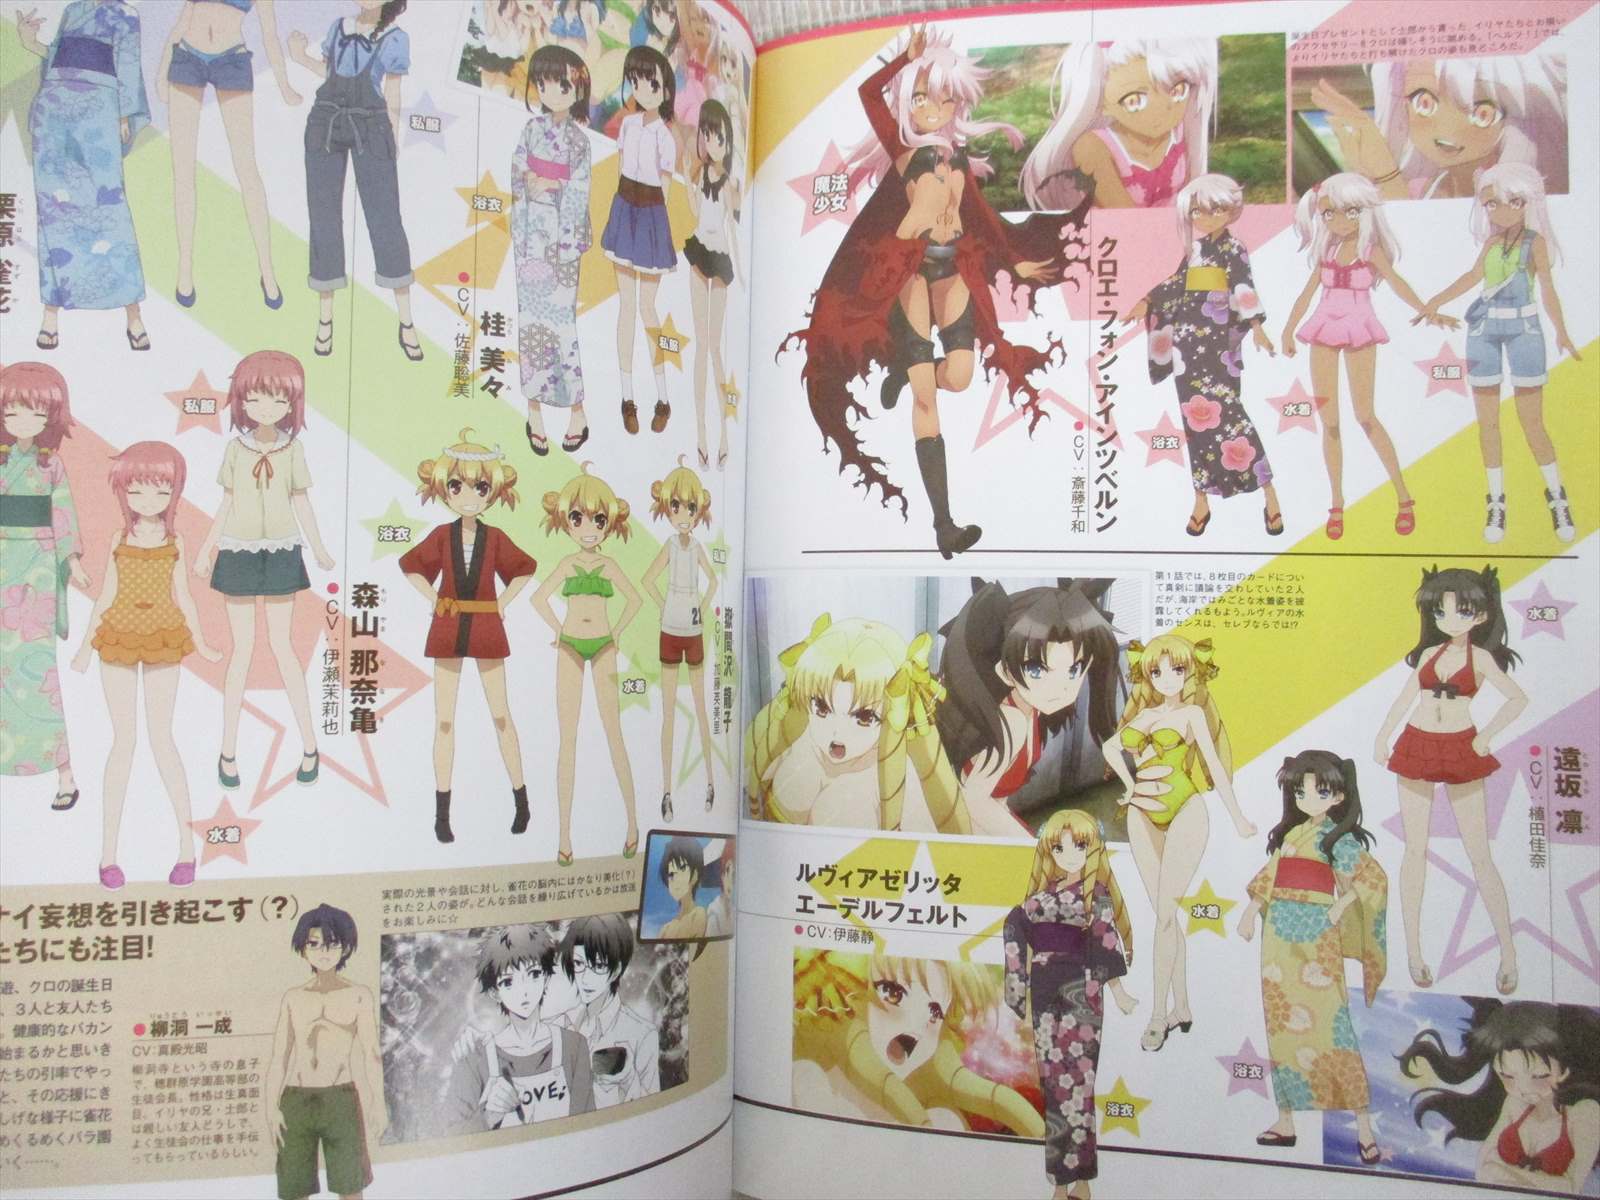 Japanese Anime Fate Kaleid Liner Prisma Illya Art Works Prisma Focus 15 Ltd Booklet Book Other Anime Collectibles